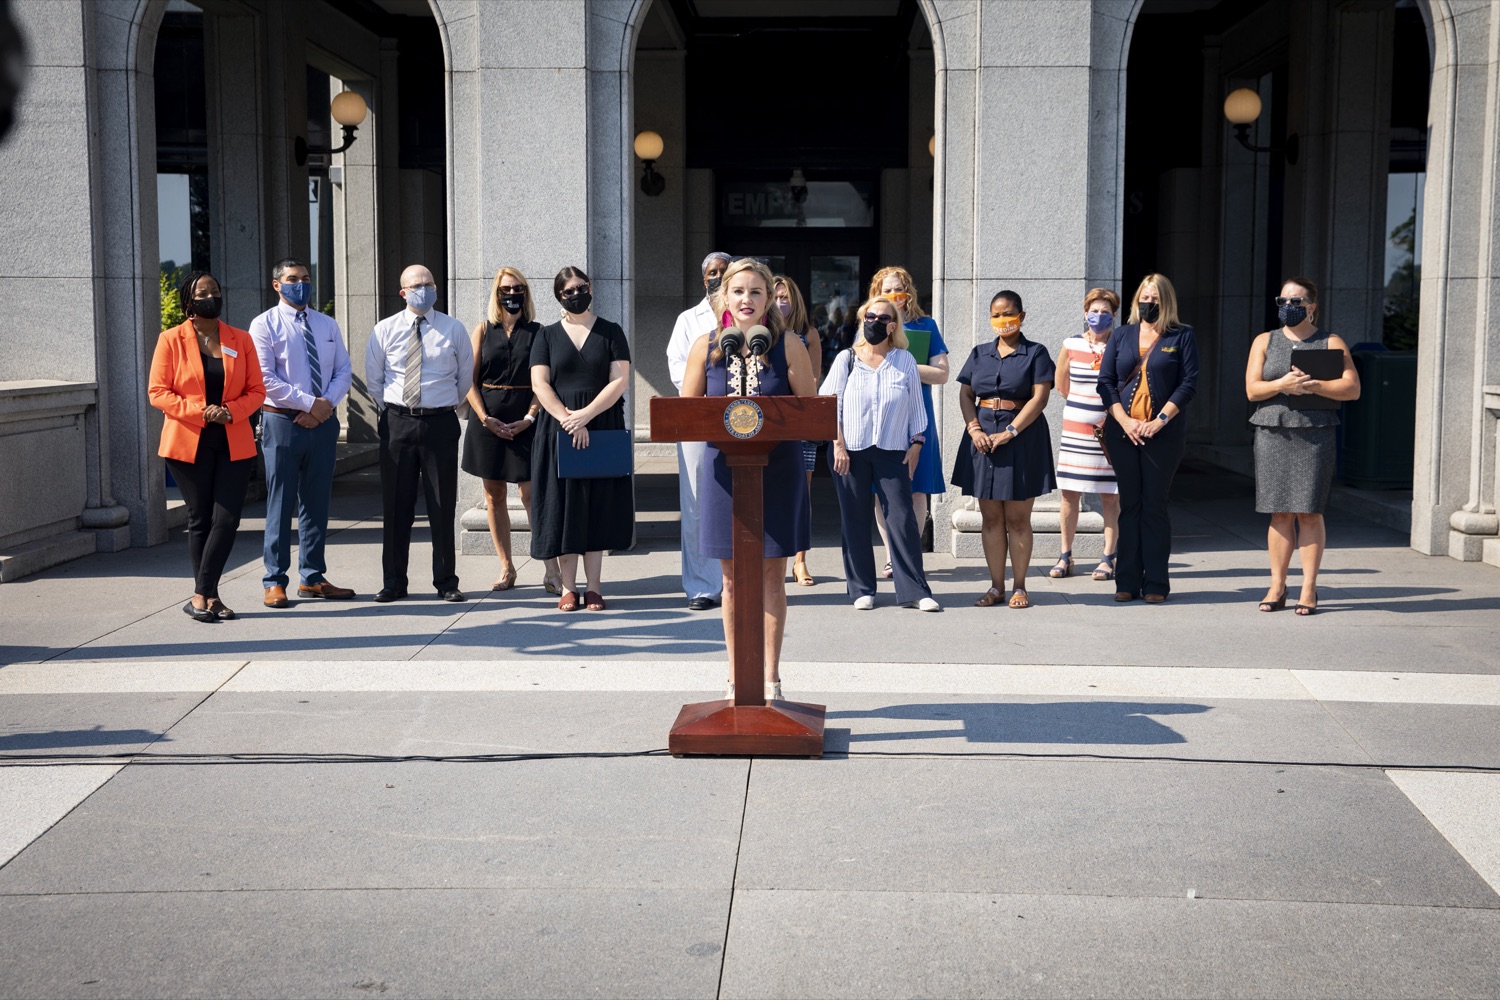 Jane Clements, Chief Executive Officer of Feeding Pennsylvania, discusses her organizations goals in ending food insecurity in Pennsylvania, in Harrisburg, PA on September 15, 2021.<br><a href="https://filesource.amperwave.net/commonwealthofpa/photo/19104_dhs_hungerAction_cz_02.JPG" target="_blank">⇣ Download Photo</a>